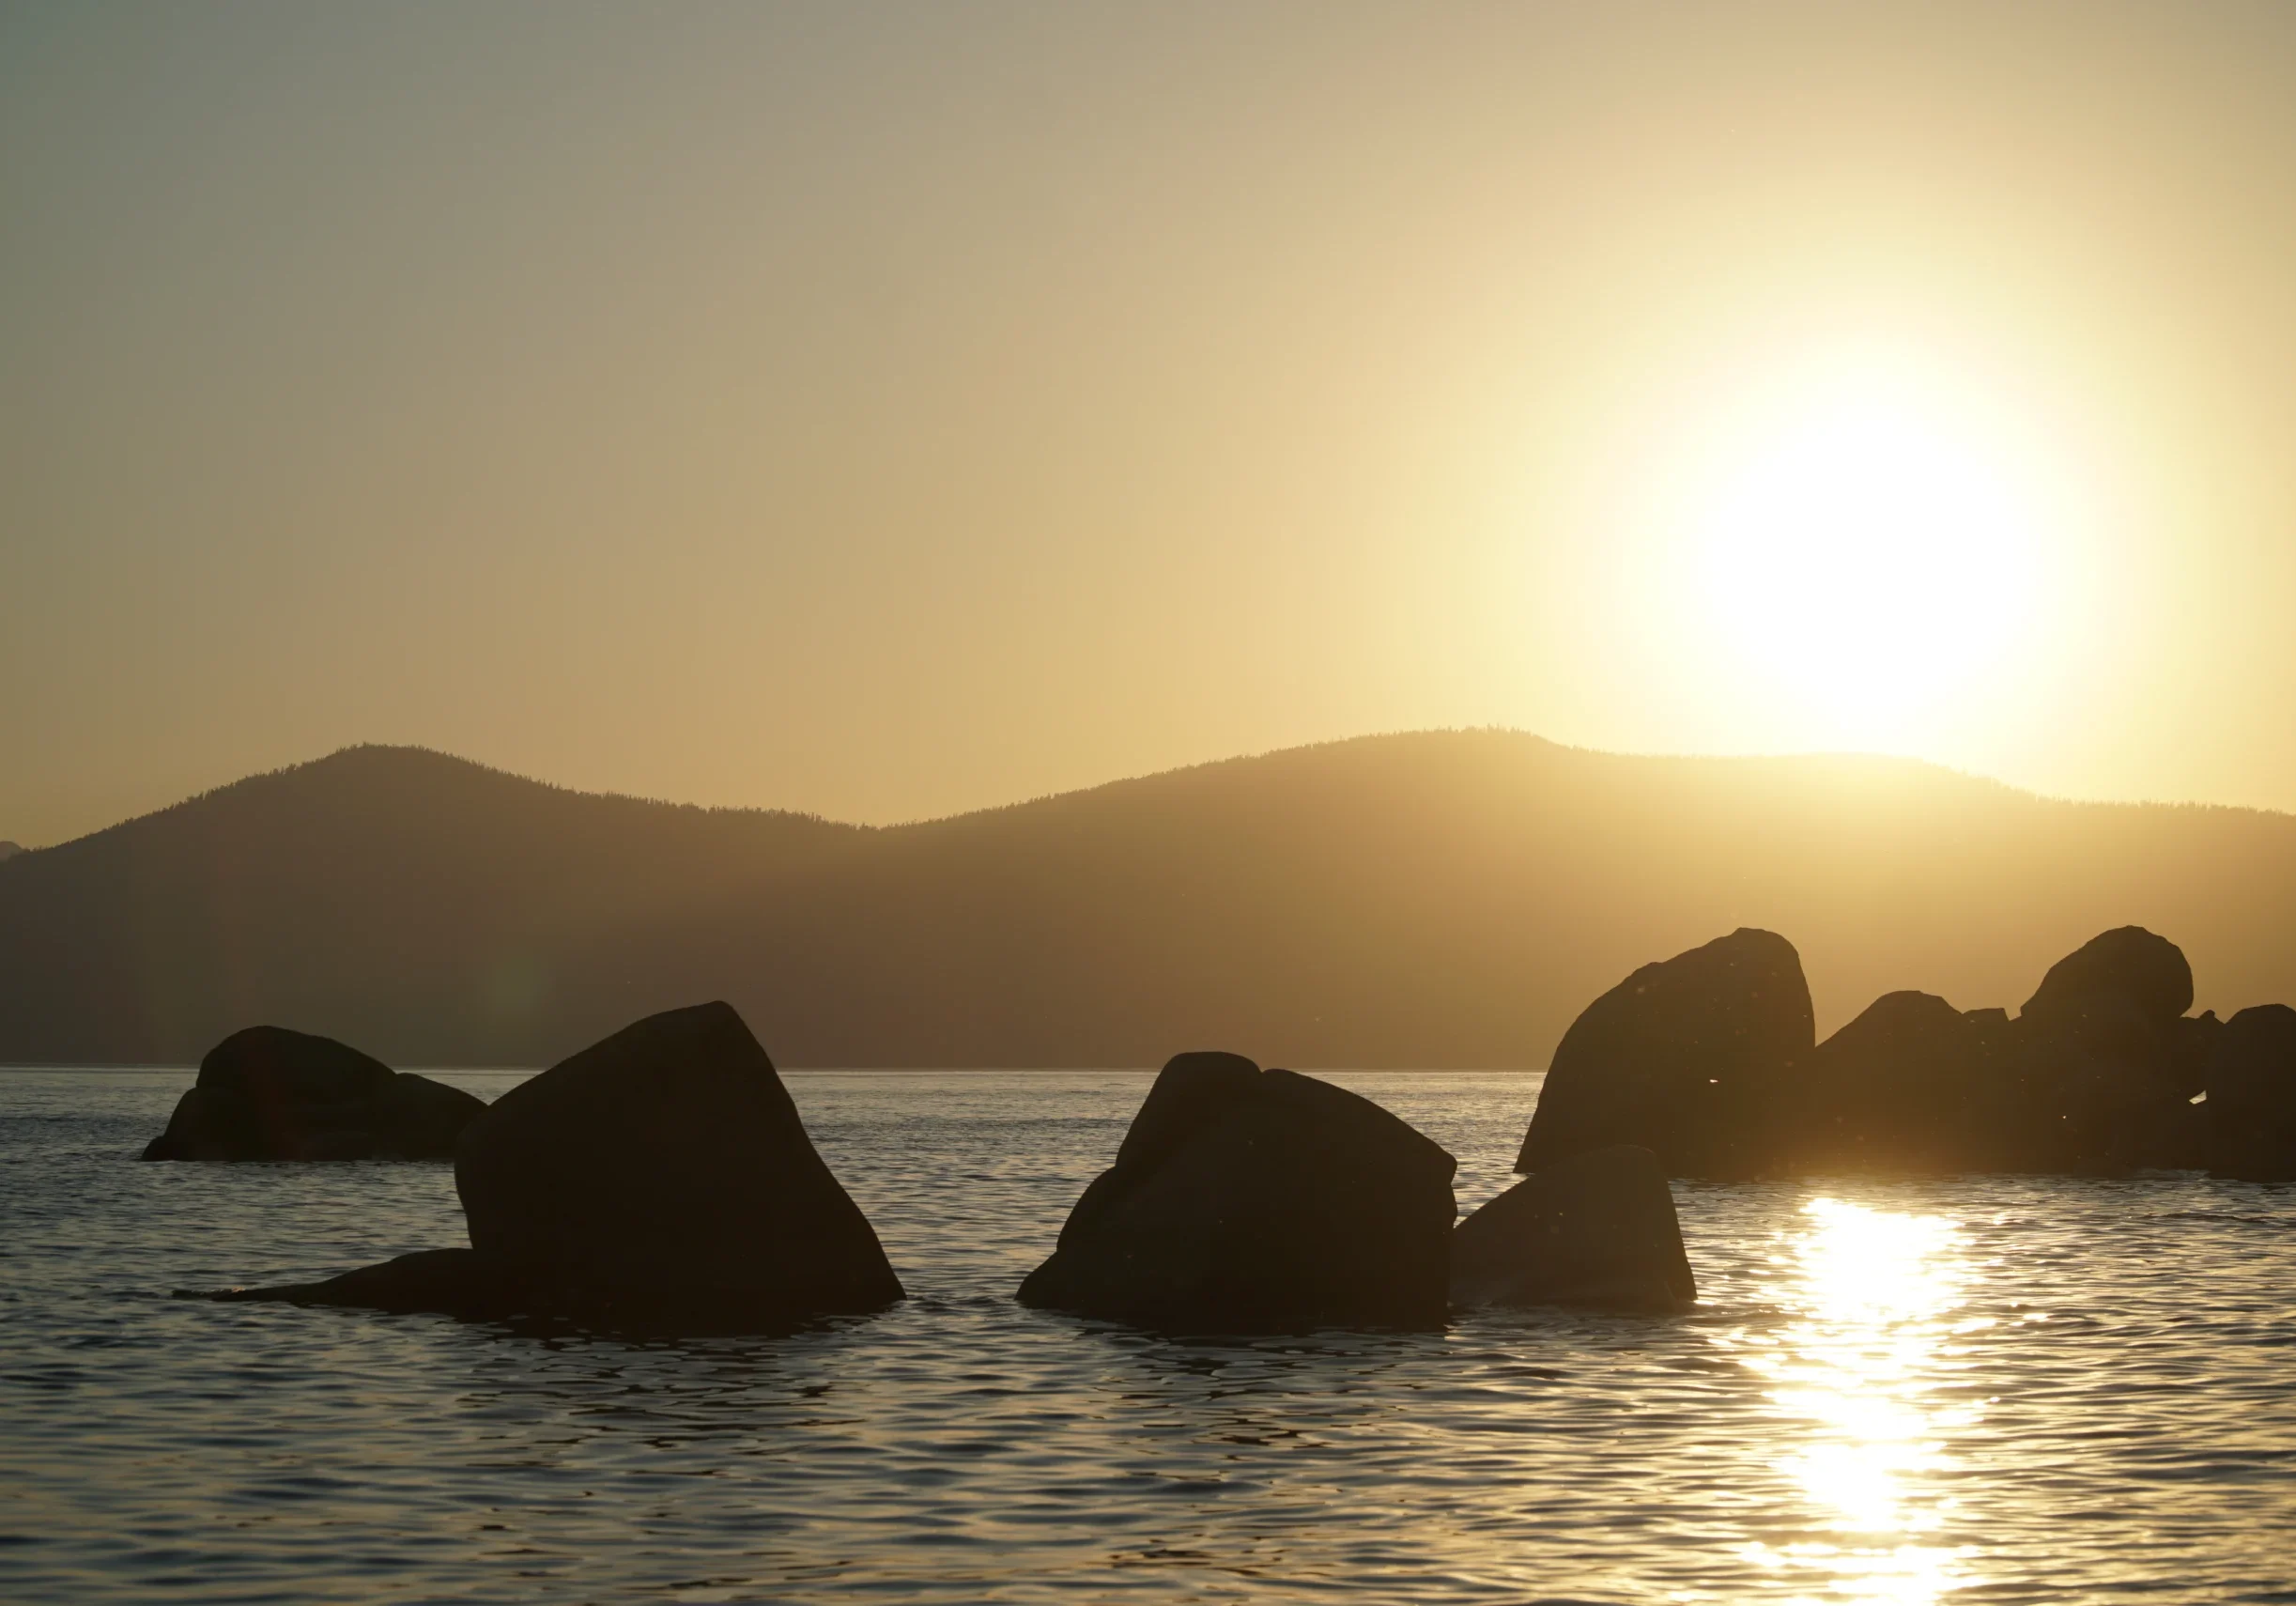 Large boulders exposed in a lake with a sunrise and mountain view in the background